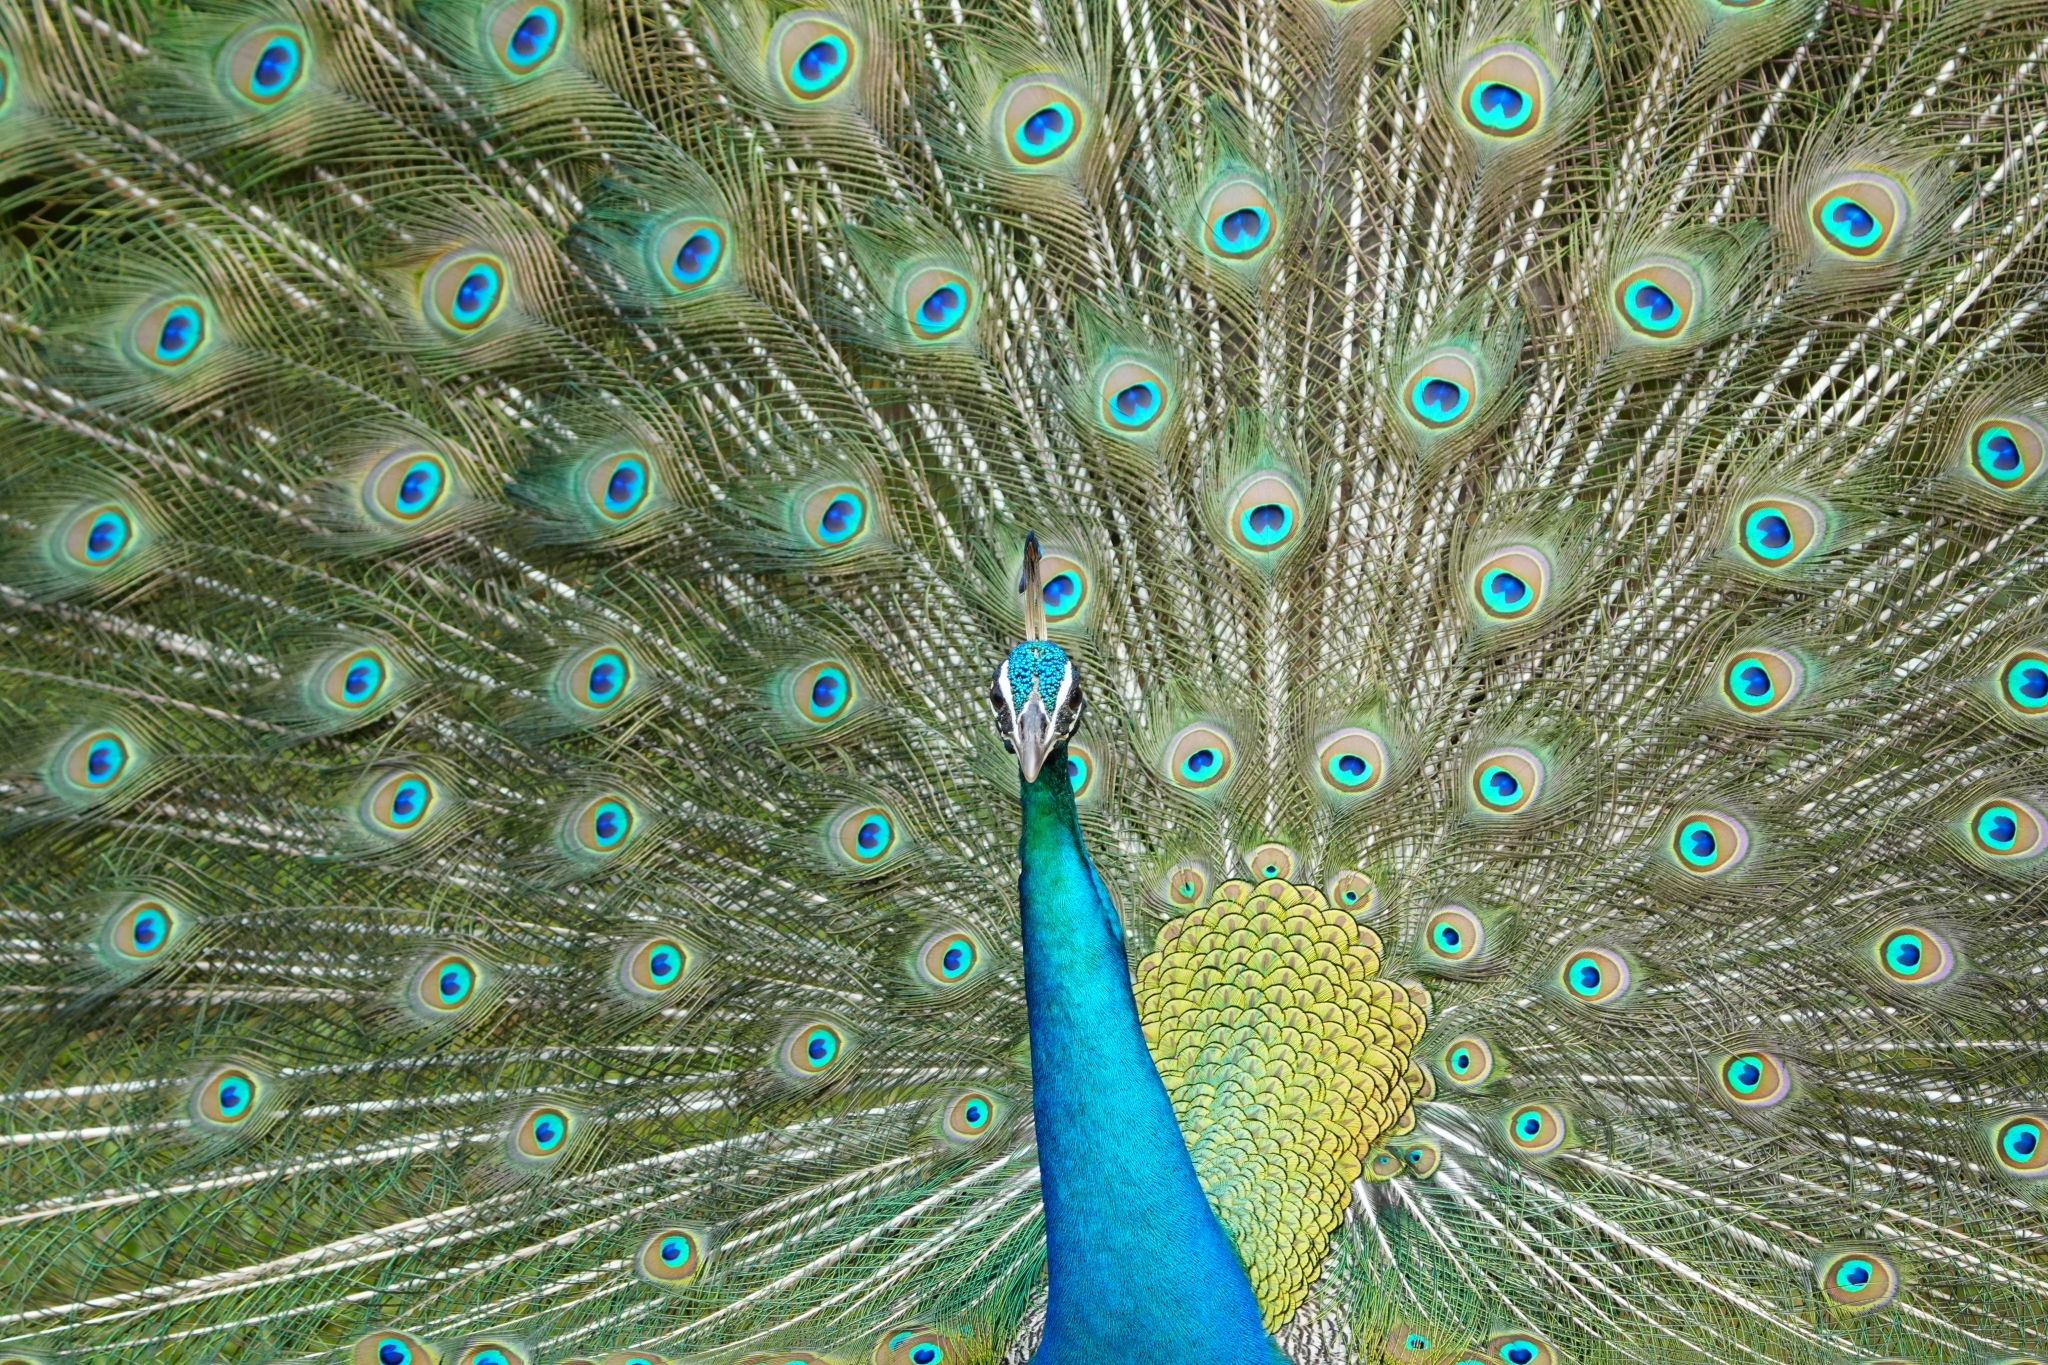 Peacock with tailfeathers spread